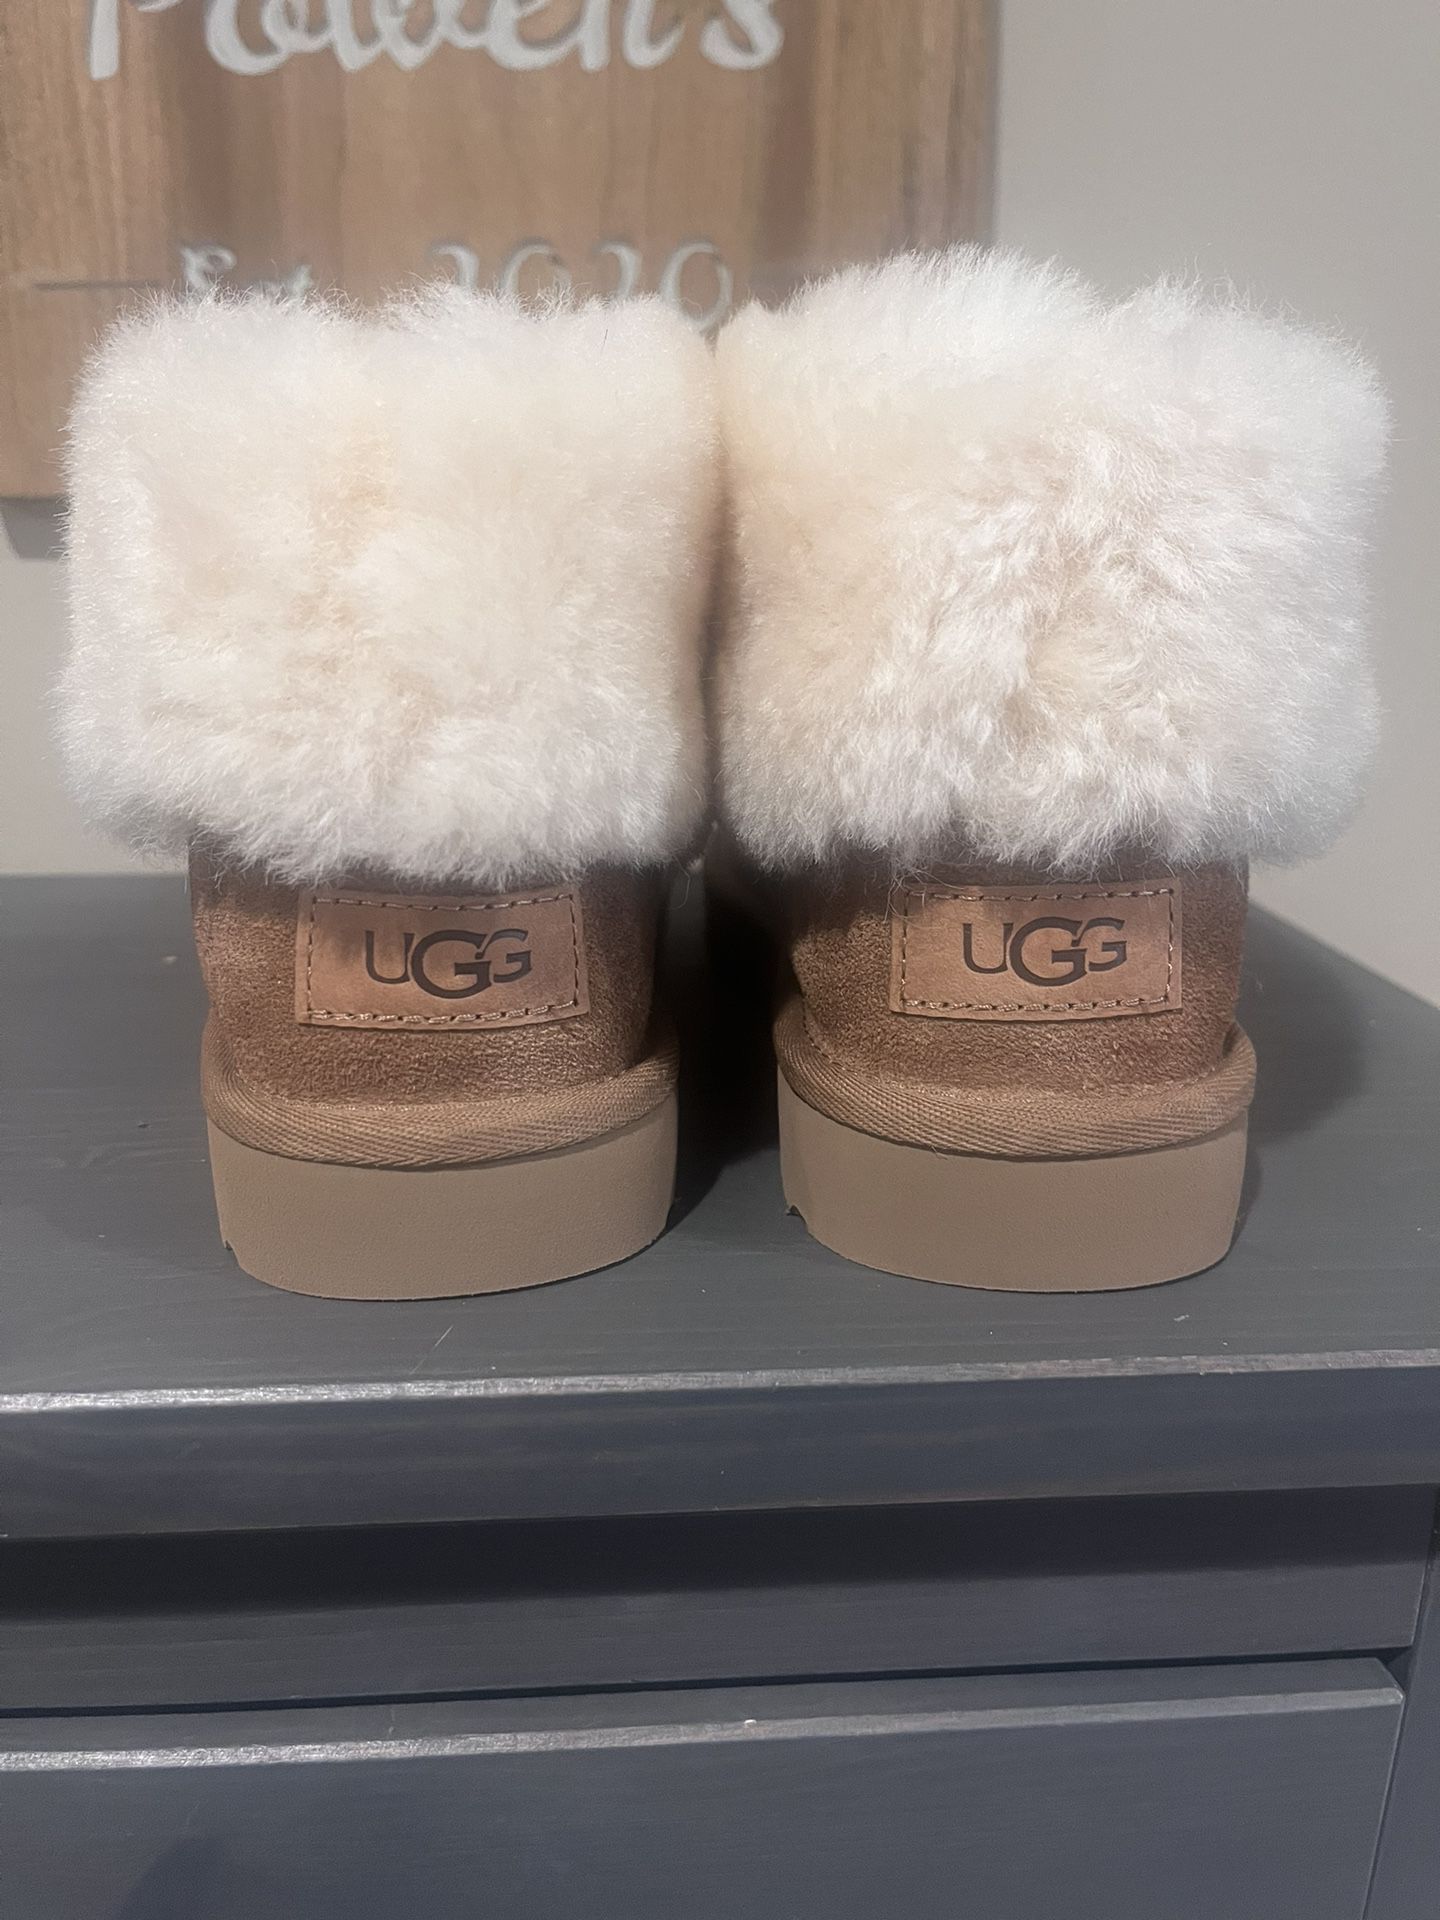 Brand New Size 6 Uggs ! 